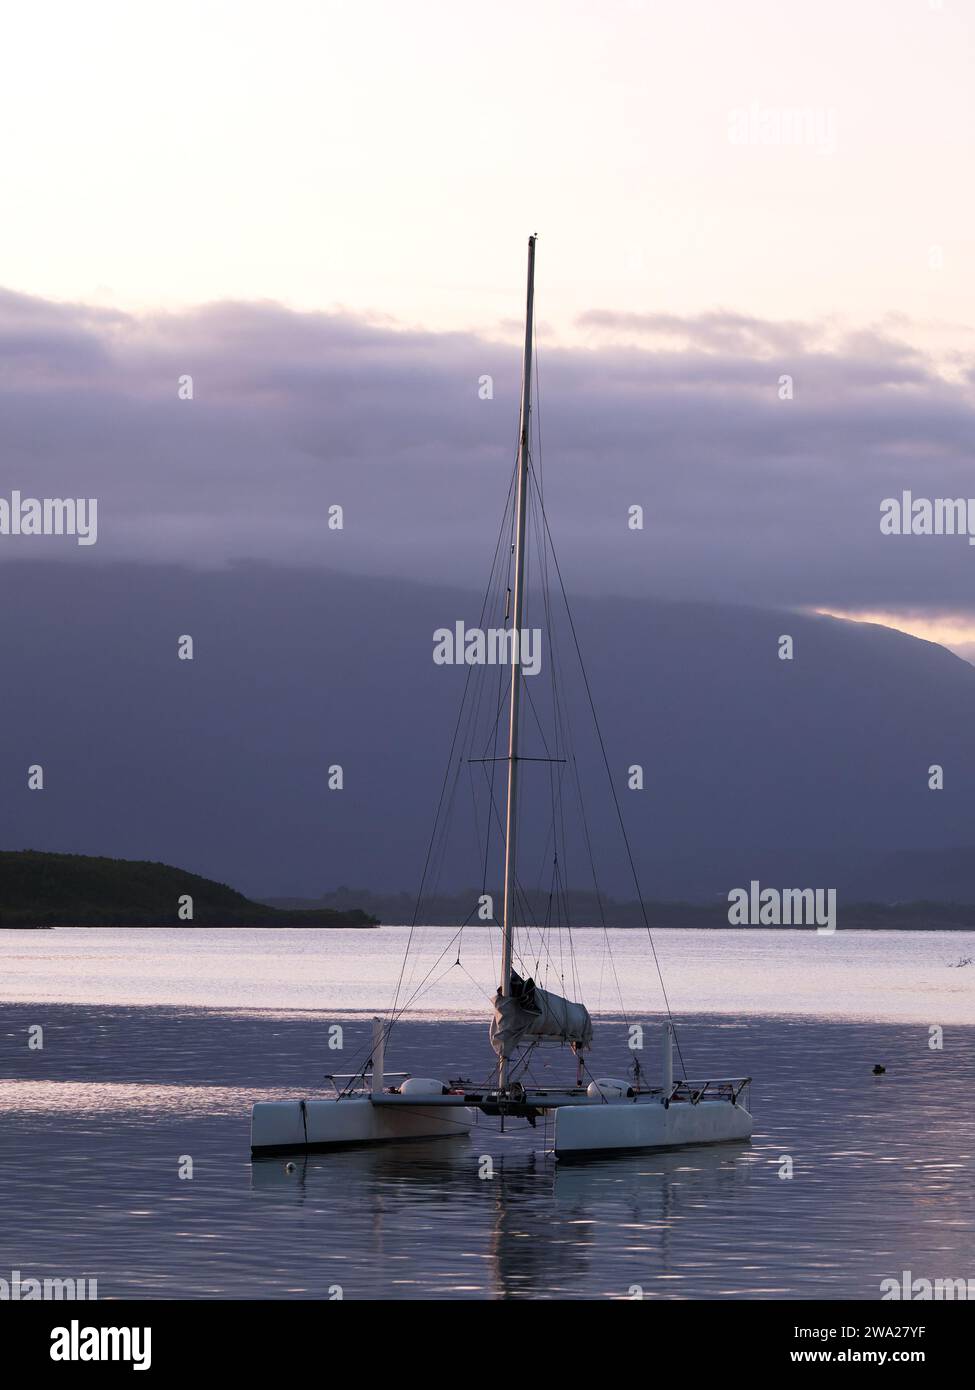 View of the sun setting over the distant hills and a catamaran moored in the foreground in Port Douglas Queensland Australia Stock Photo